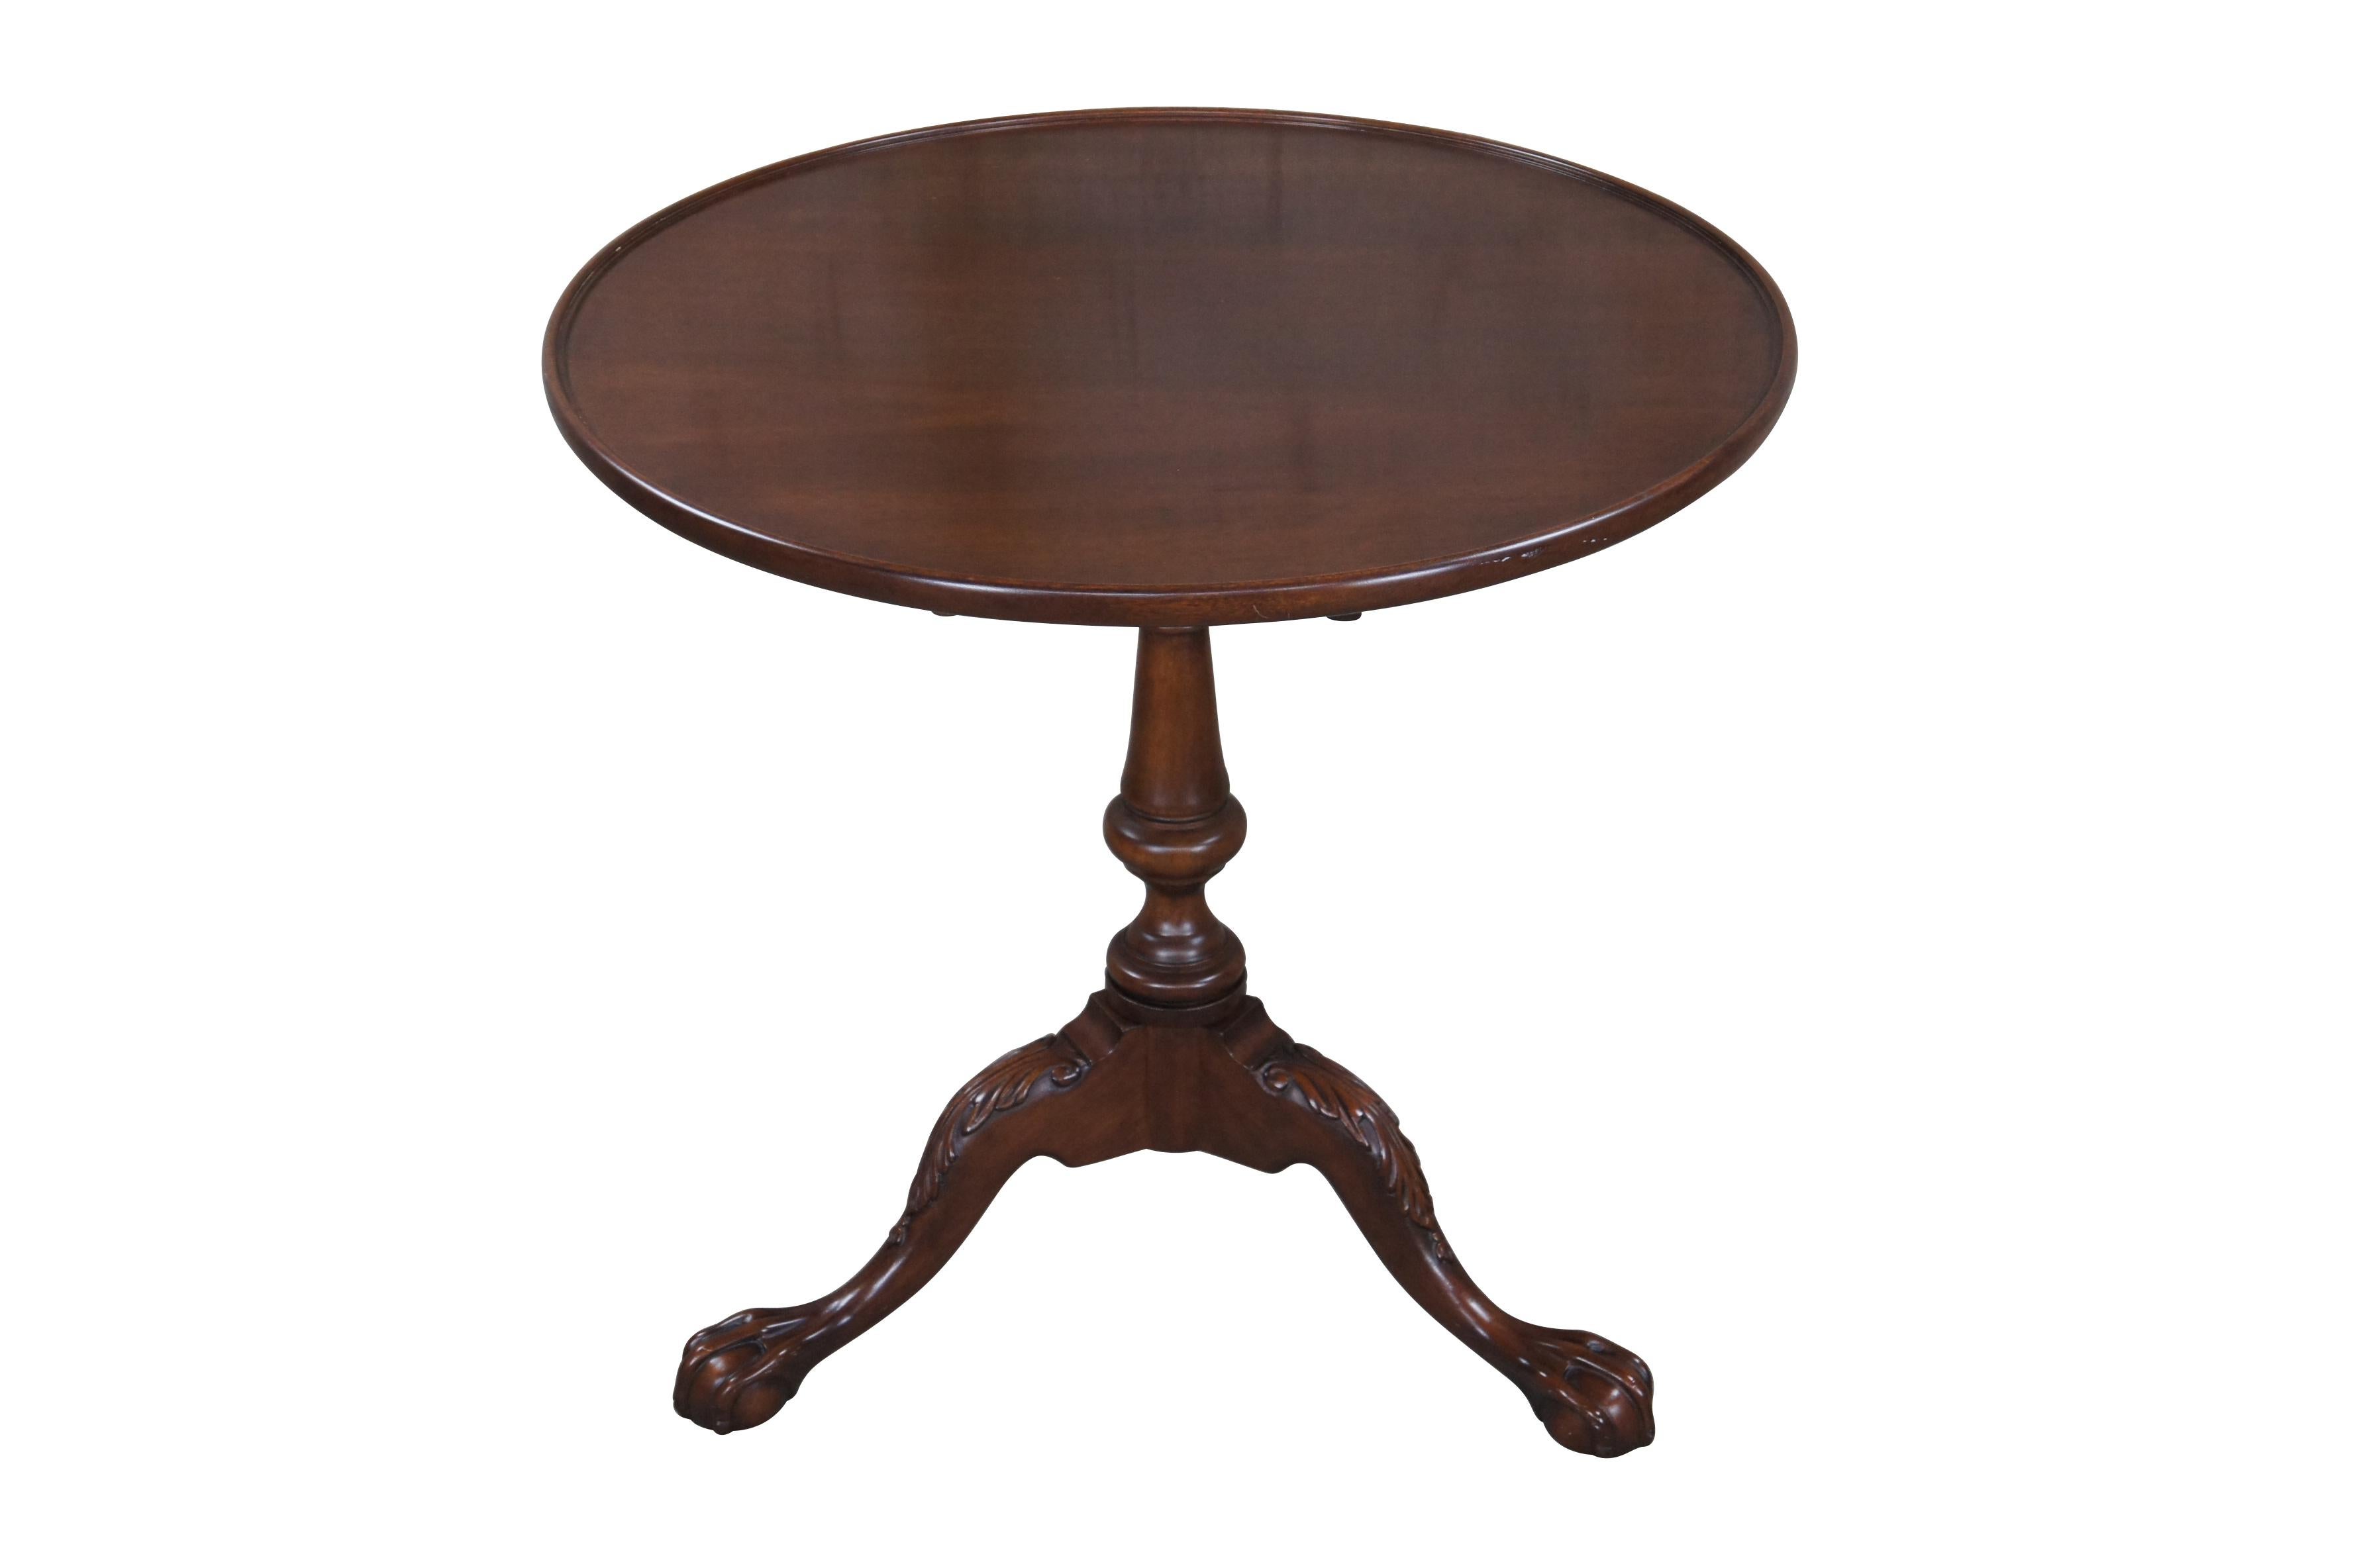 An impressive tea table drawing inspiration from Colonial and Chippendale styling, circa second half 20th century. Made from mahogany with a round tilt top over revolving birdcage and turned baluster base leading to downswept acanthus carved legs